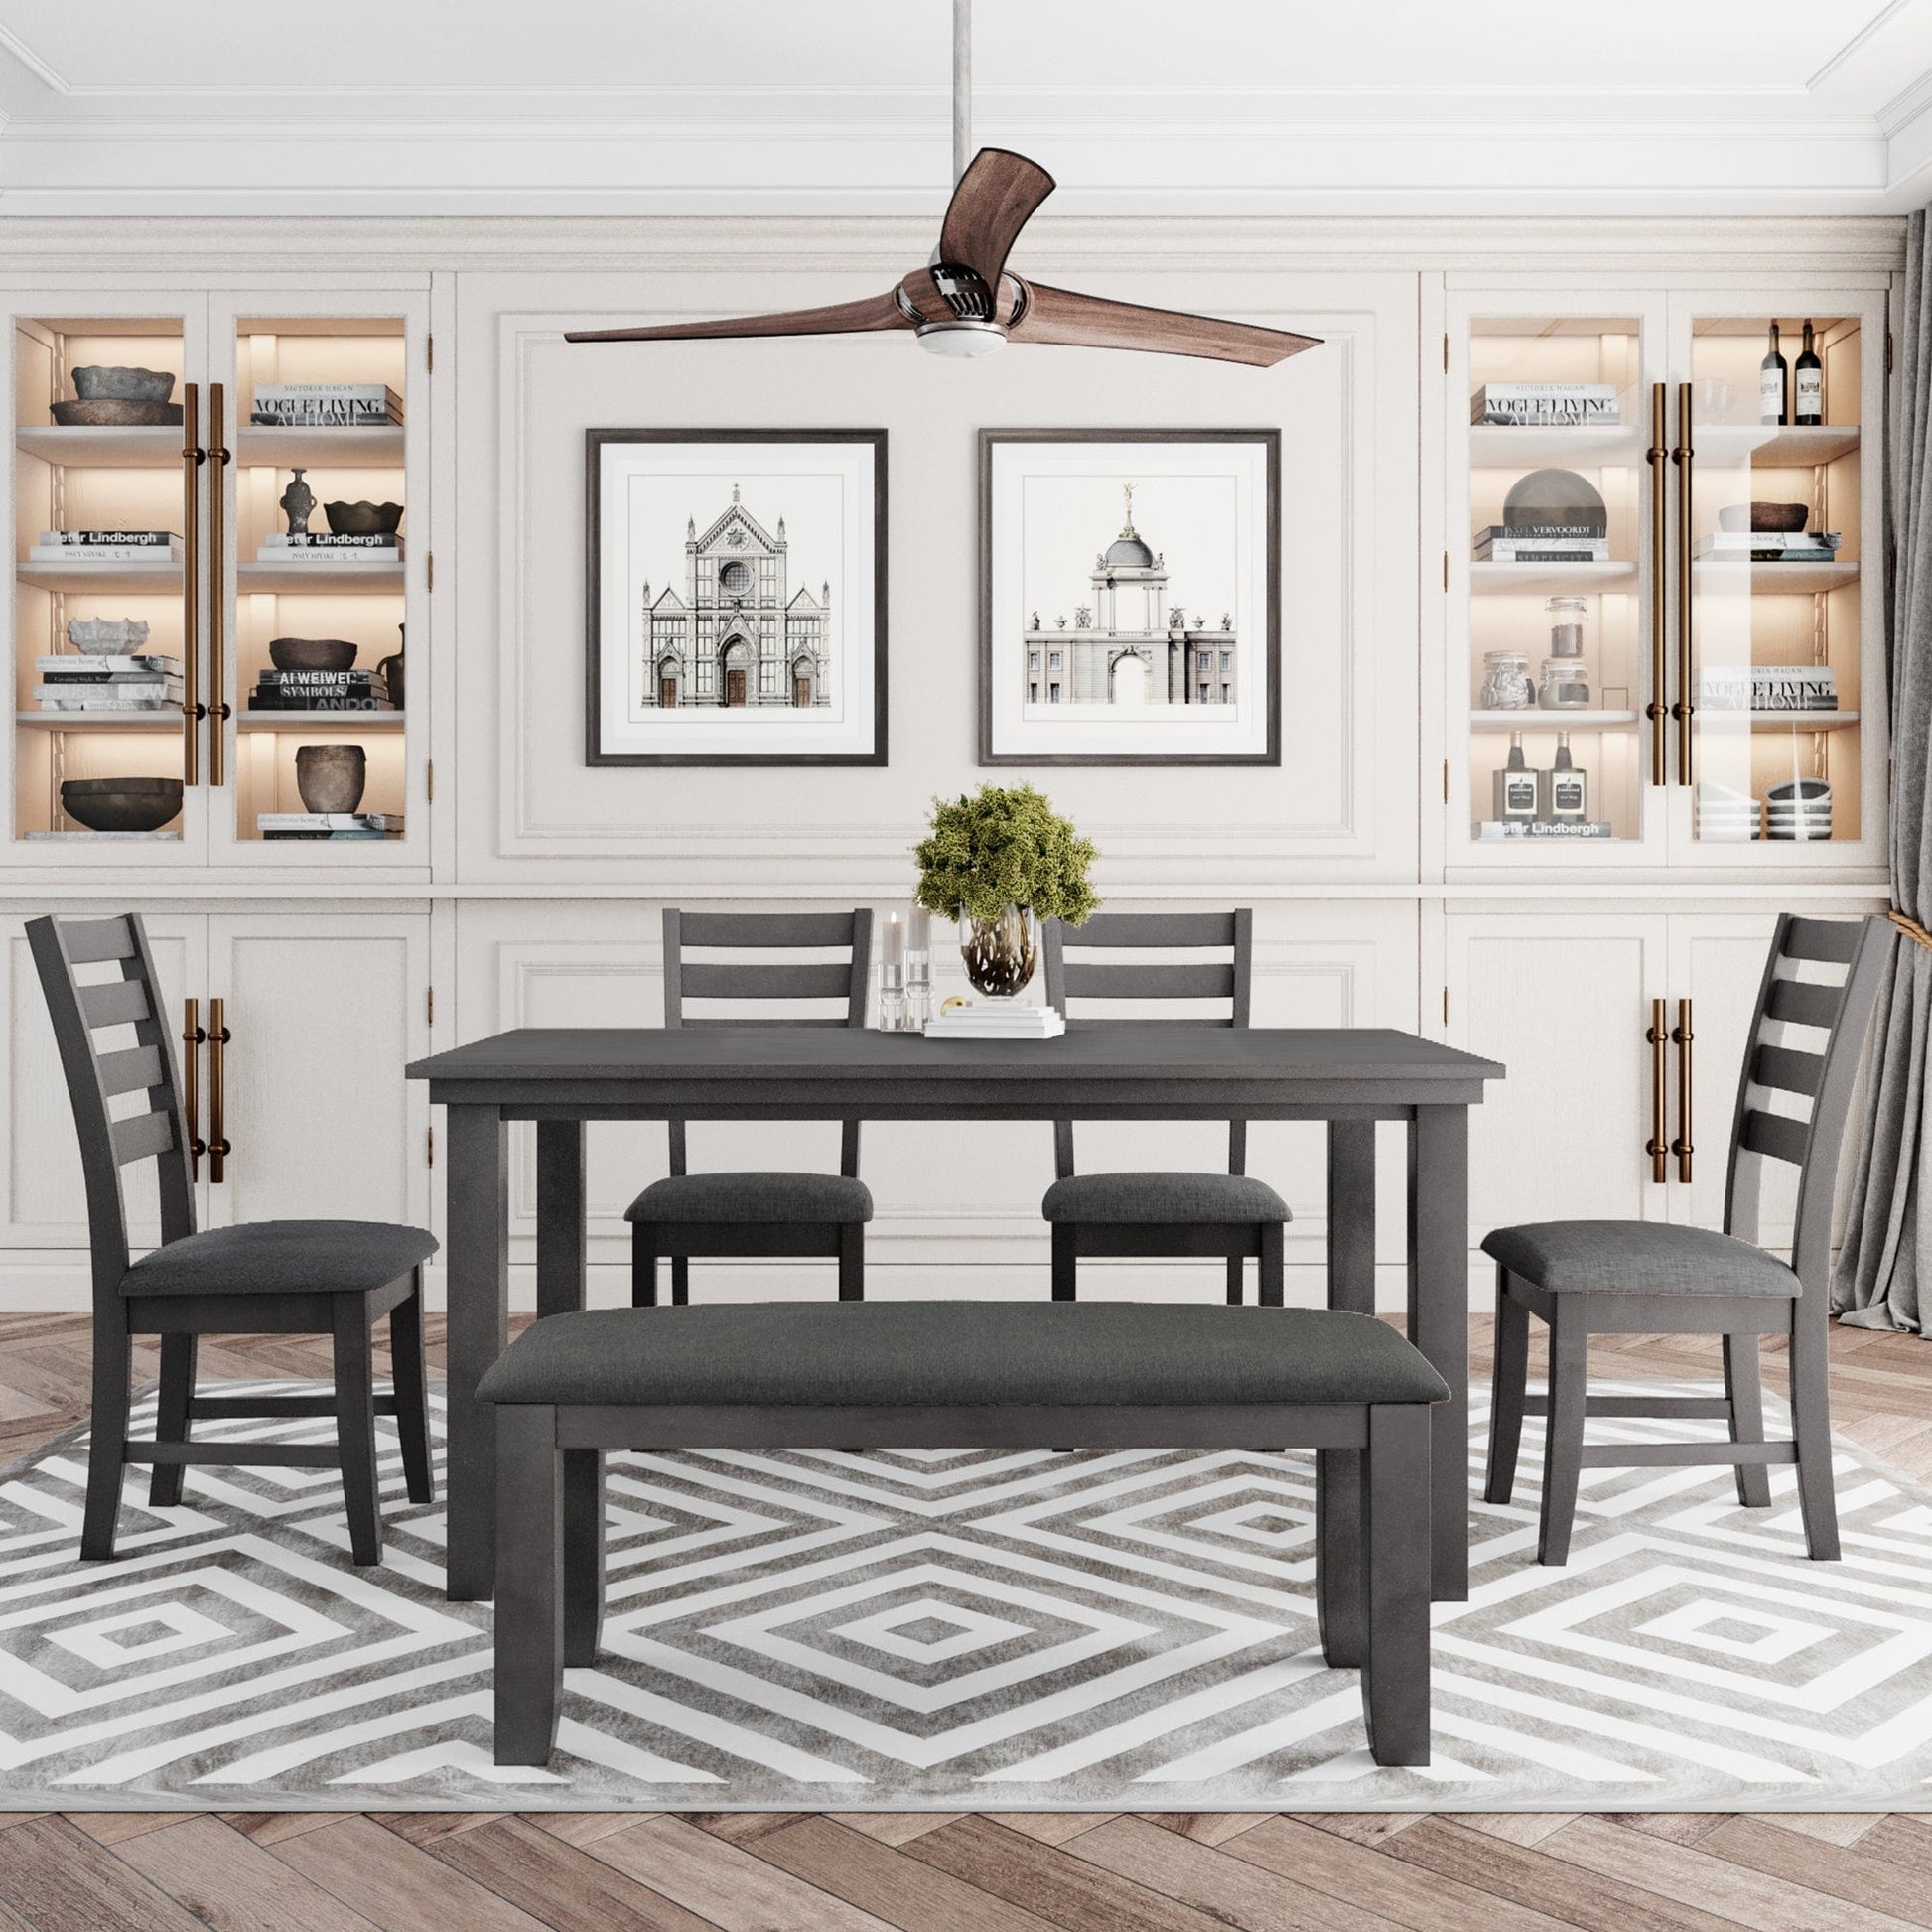 1st Choice Furniture Direct Dining Set 1st Choice 6-Piece Gray Dining Set w/Rustic Wood Table, Chairs & Bench